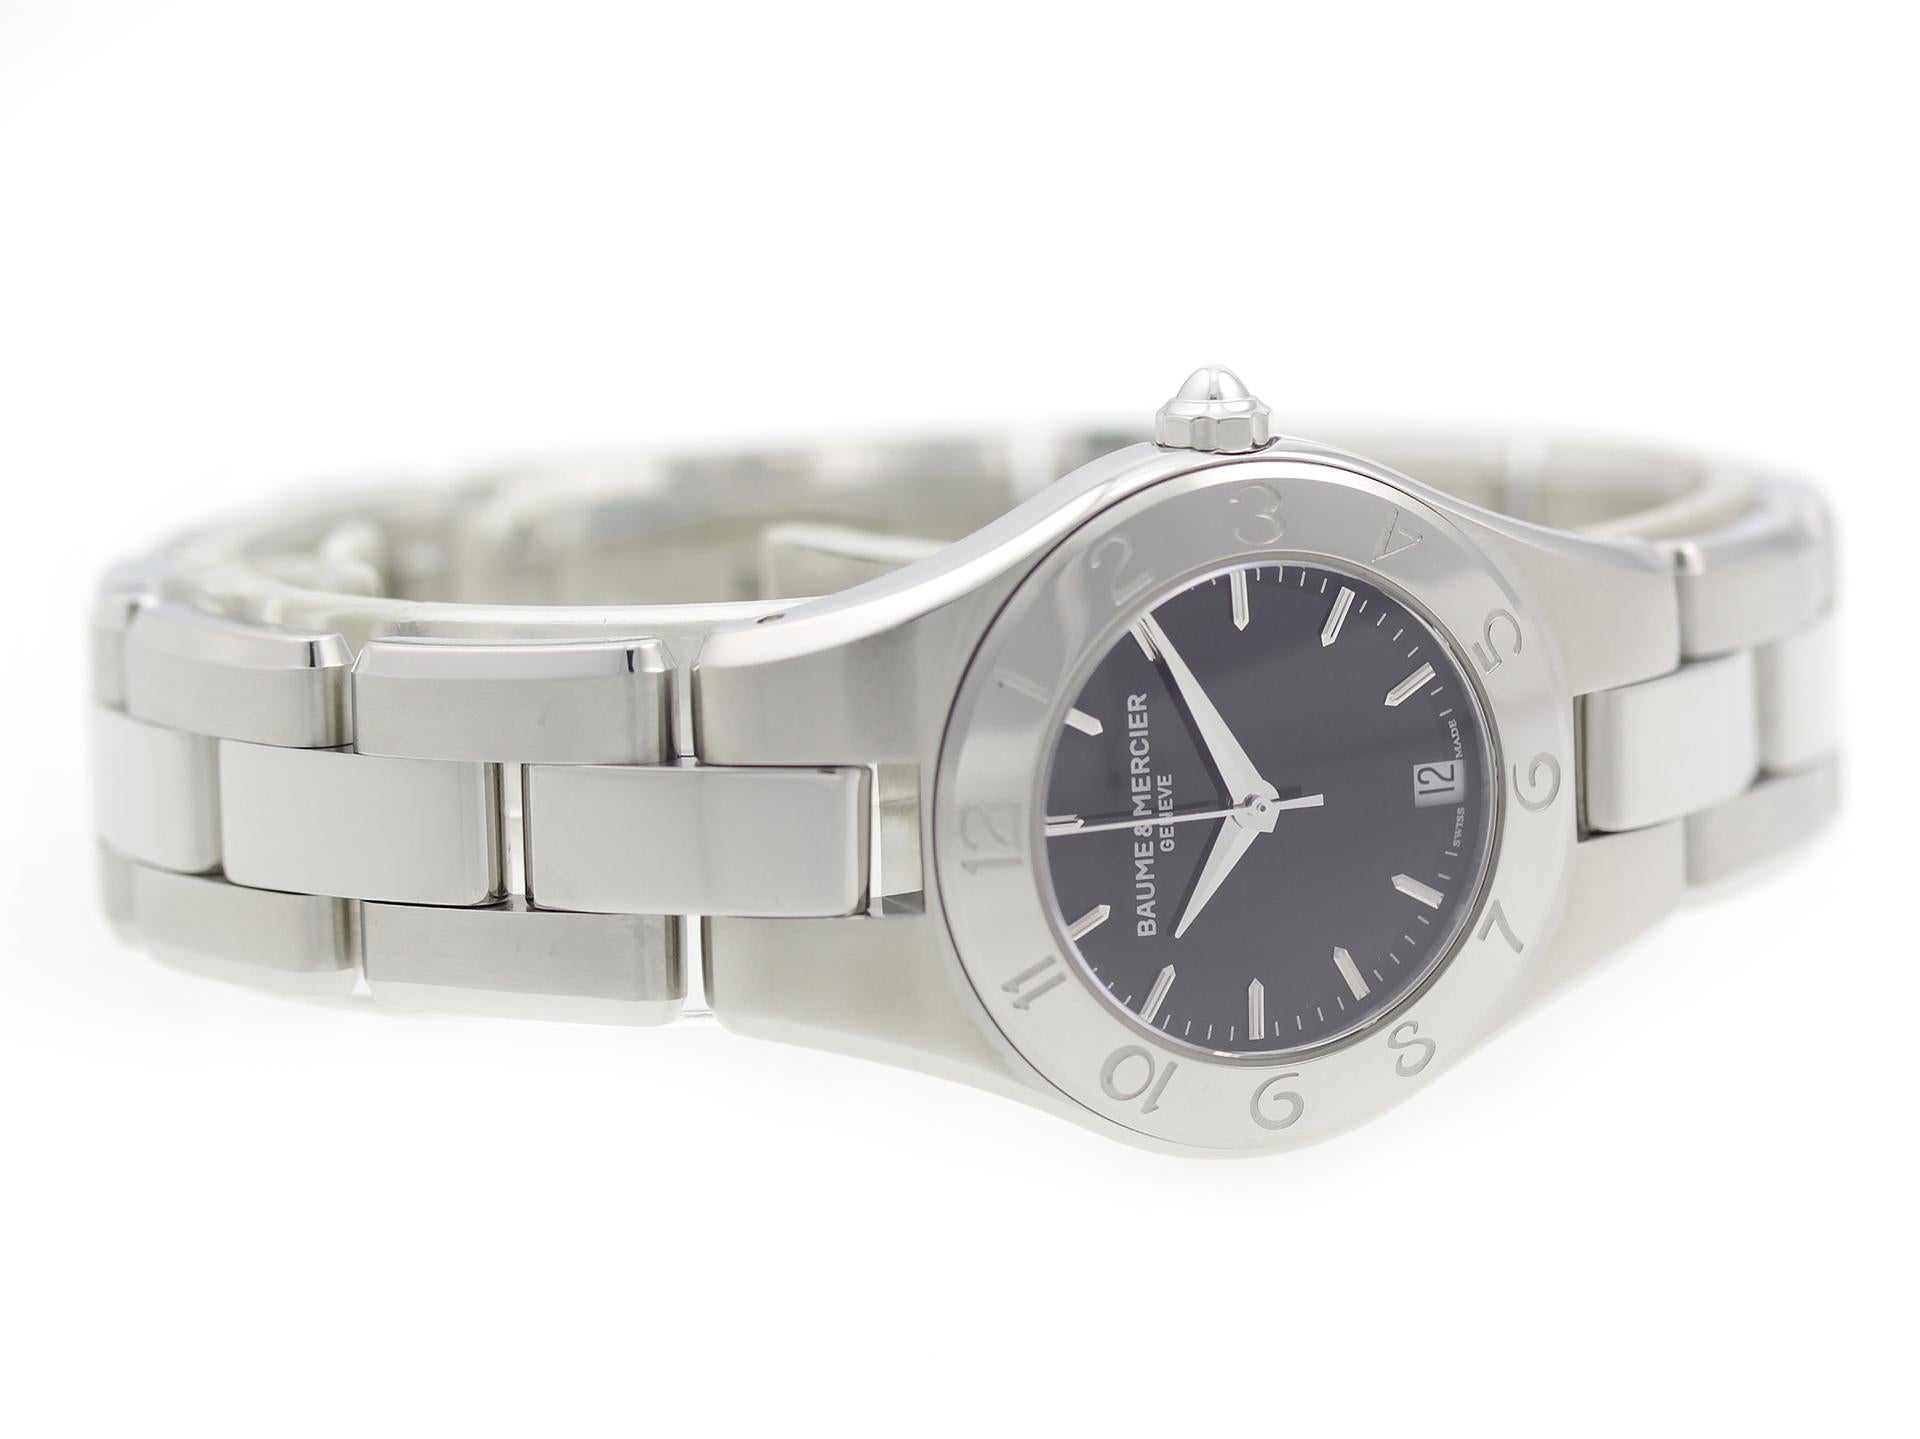 Stainless steel Baume & Mercier Linea MOA10010 watch, water resistance to 50m, with date and numeral bezel.

Watch	
Brand:	Baume & Mercier
Series:	Linea
Model #:	MOA10010
Gender:	Ladies’
Condition:	Excellent Display Model
Box/Papers:	Gift Box, 2